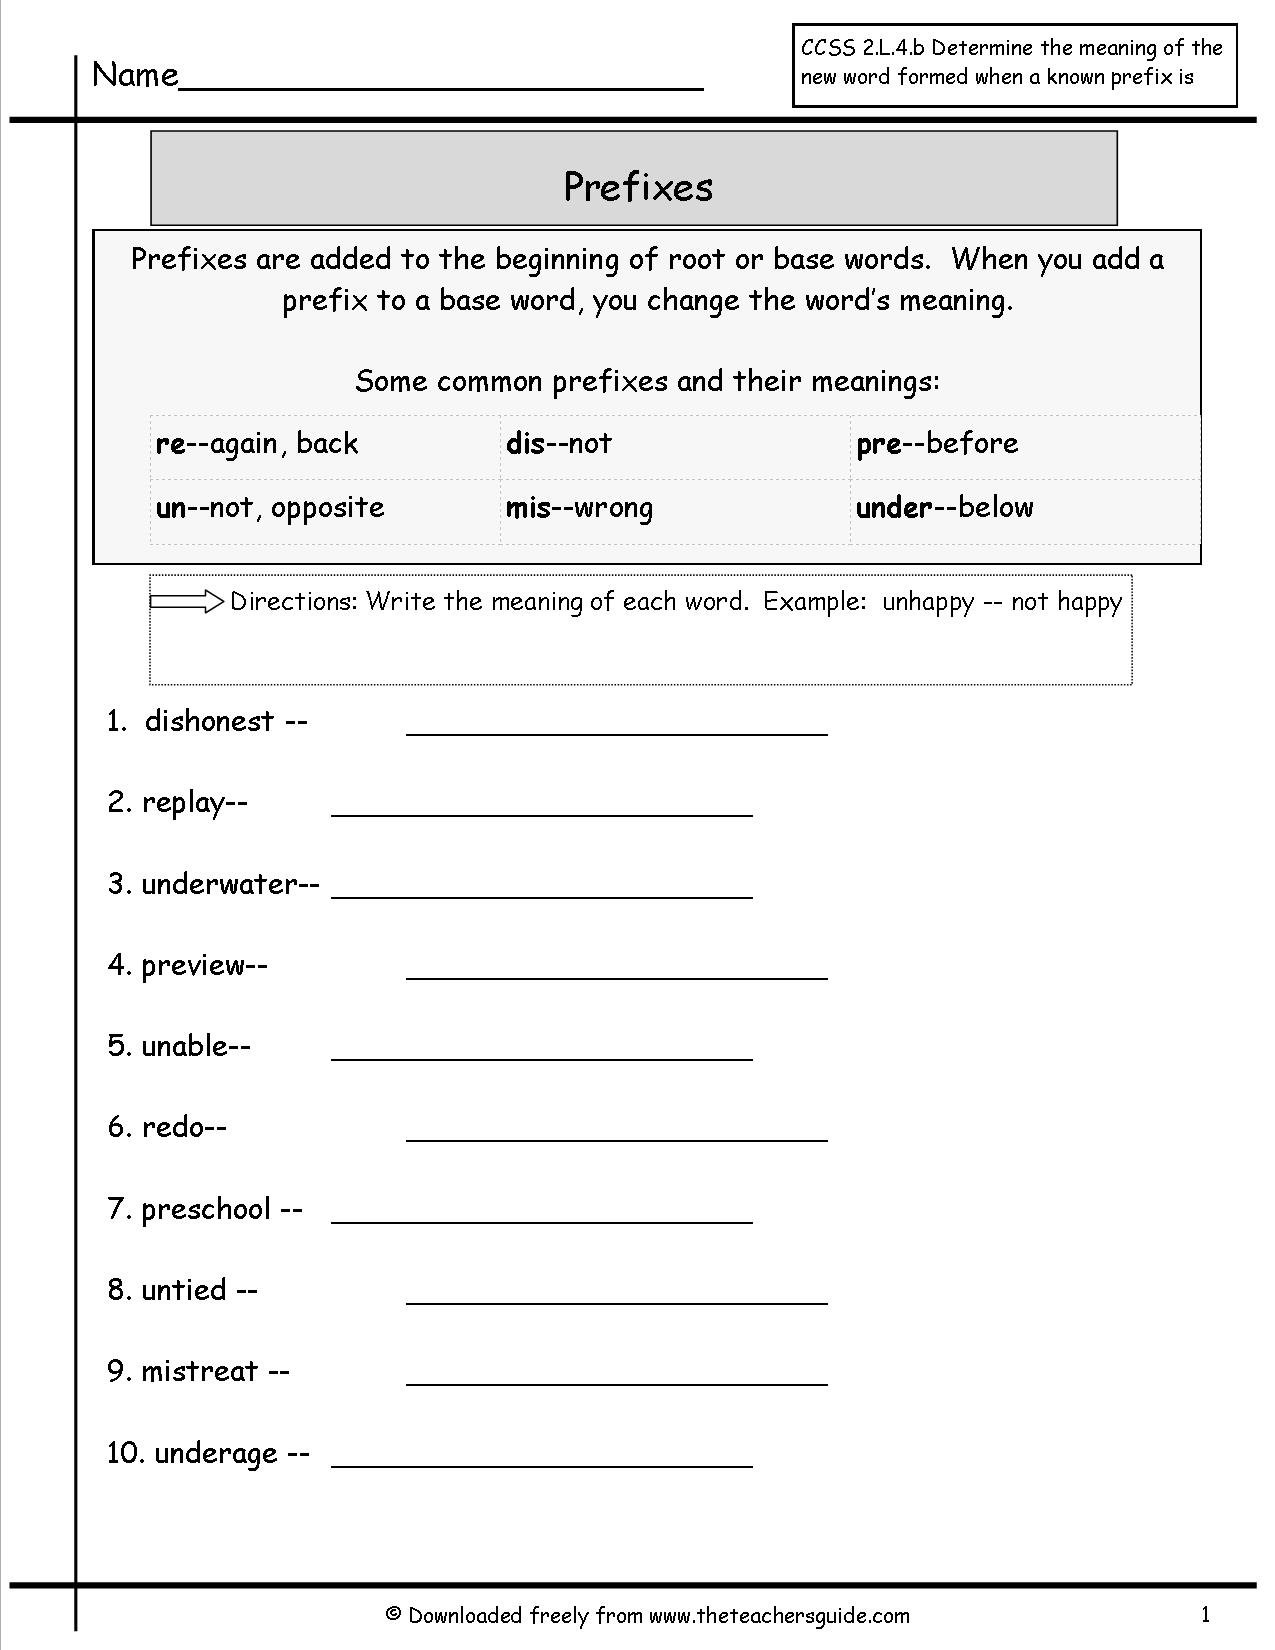 Free Prefixes And Suffixes Worksheets From The Teacher's Guide Along With Grammar Suffixes Worksheets